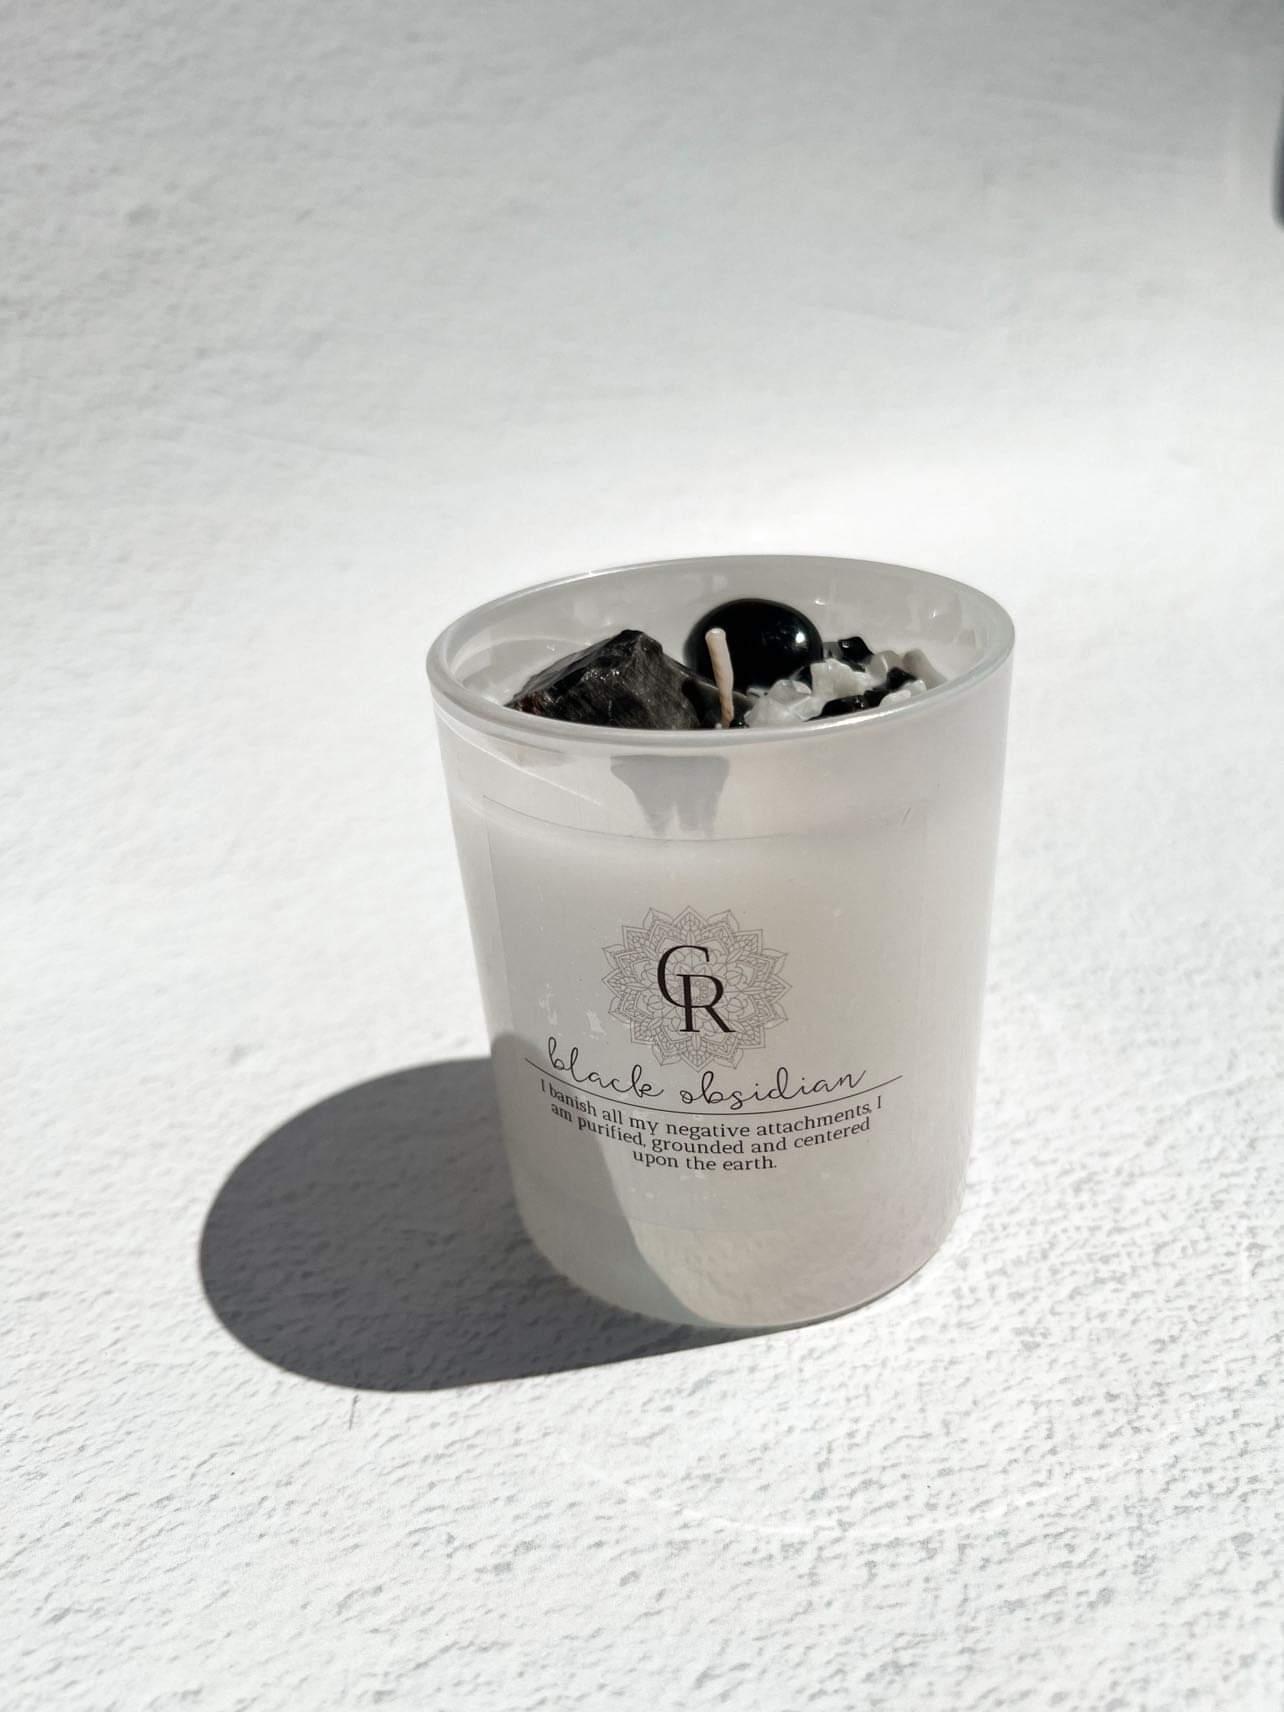 Black Obsidian and Moonstone Crystal Candle